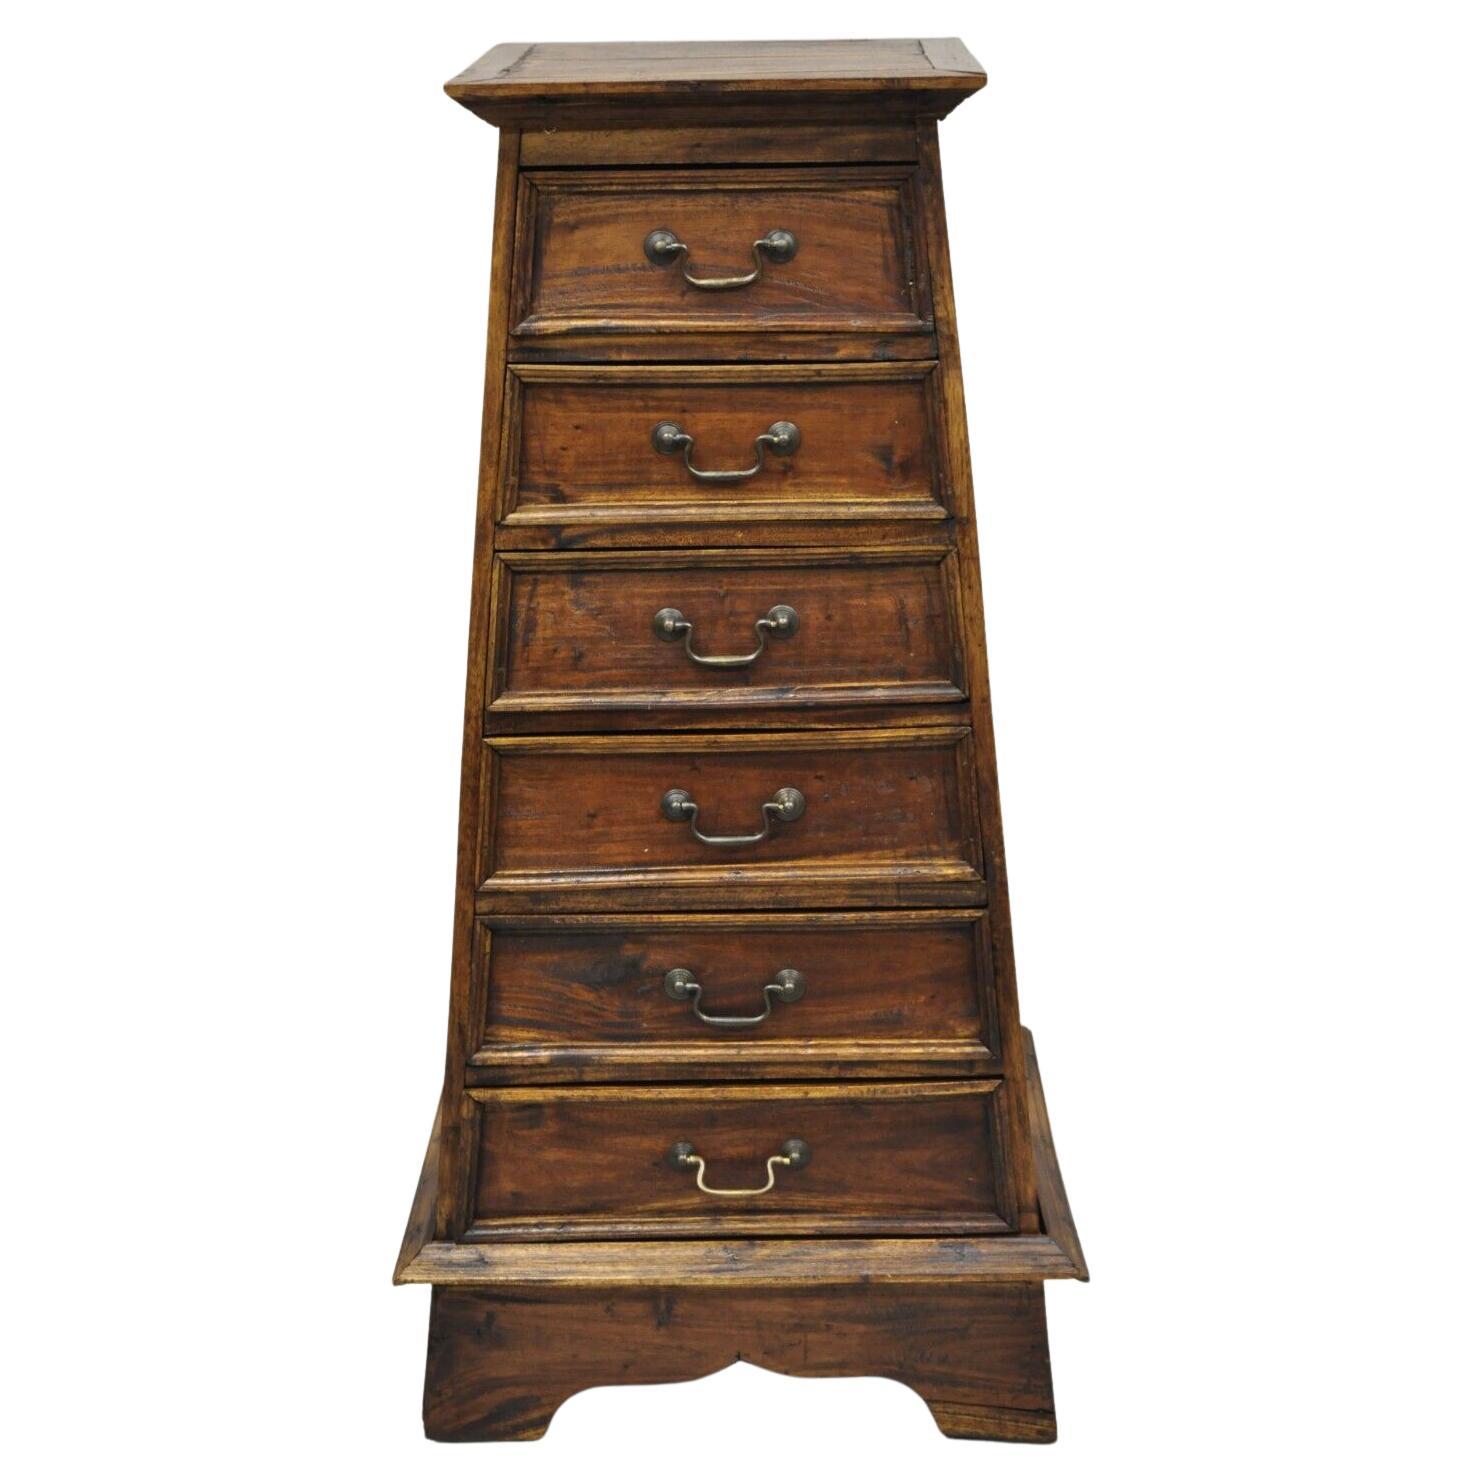 Country Provincial Style Wooden Tall Pyramid Chest Pedestal Stand Side Table